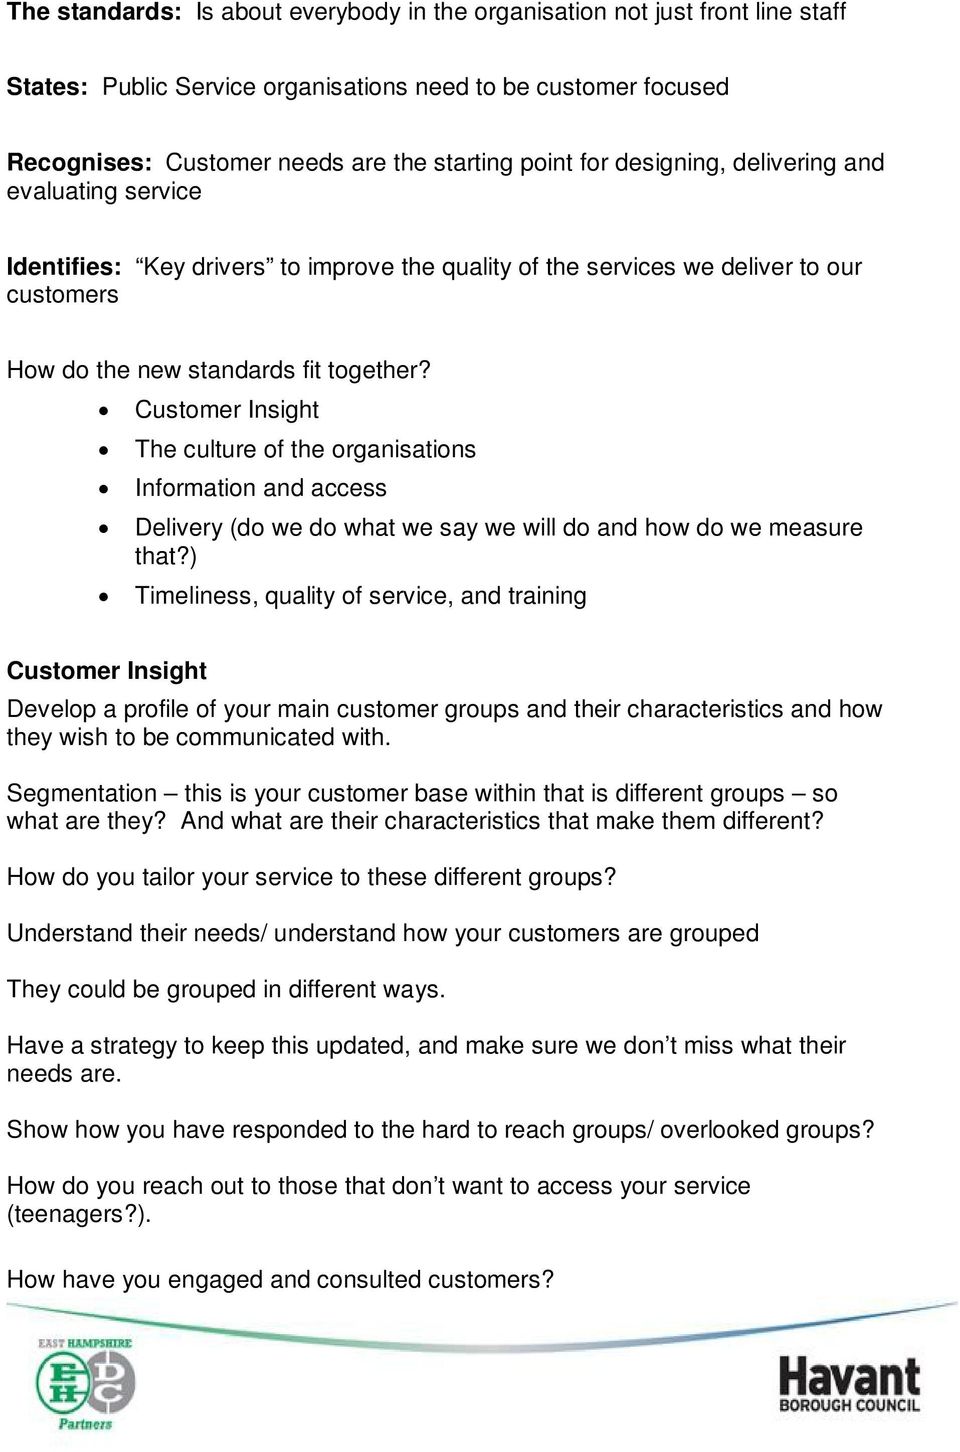 Customer Insight The culture of the organisations Information and access Delivery (do we do what we say we will do and how do we measure that?